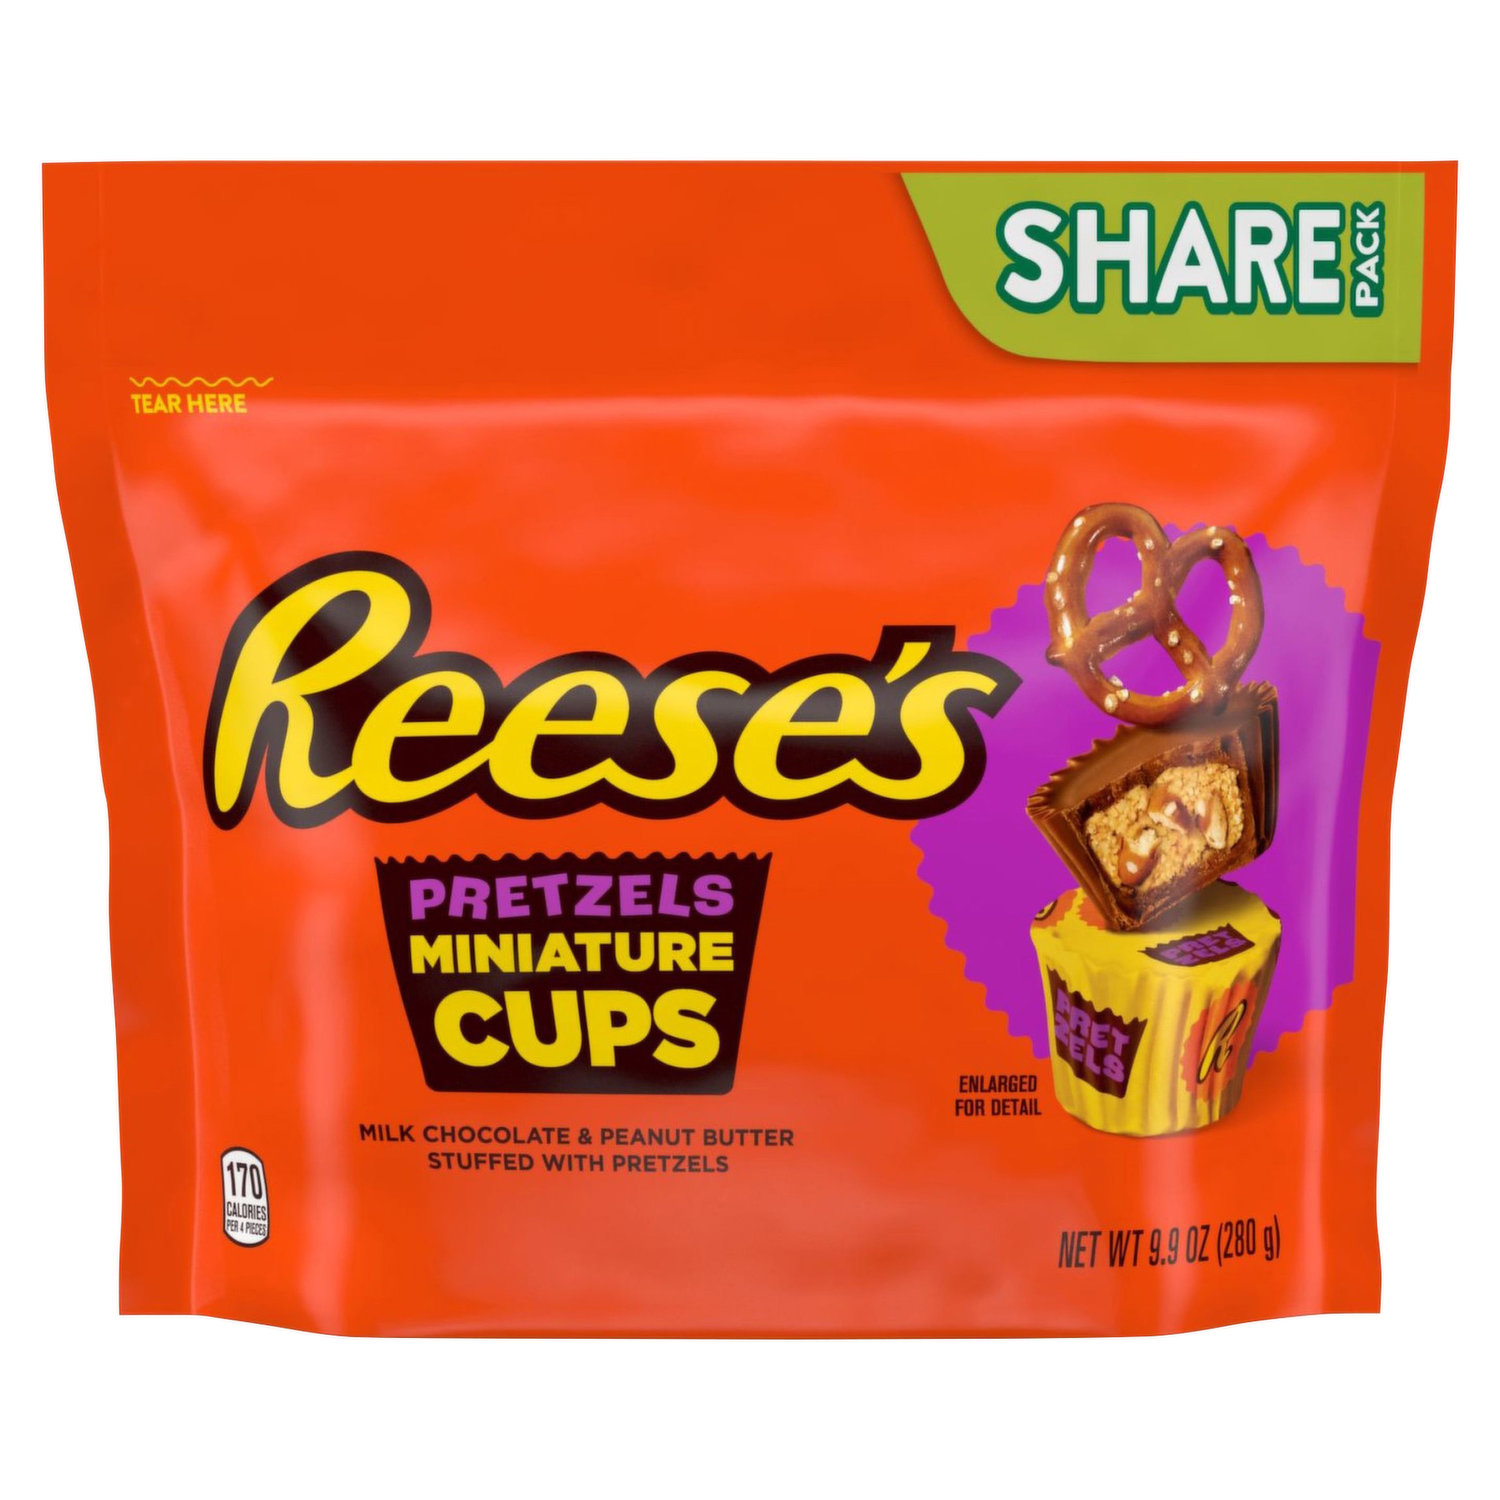 Reese's Big Cup Assorted Variety 12 Pack - Includes (4) Reese's Cup  w/Caramel, (4) Reese's Peanut Butter Cups, (4) Reese's Cup Stuffed with  Pieces